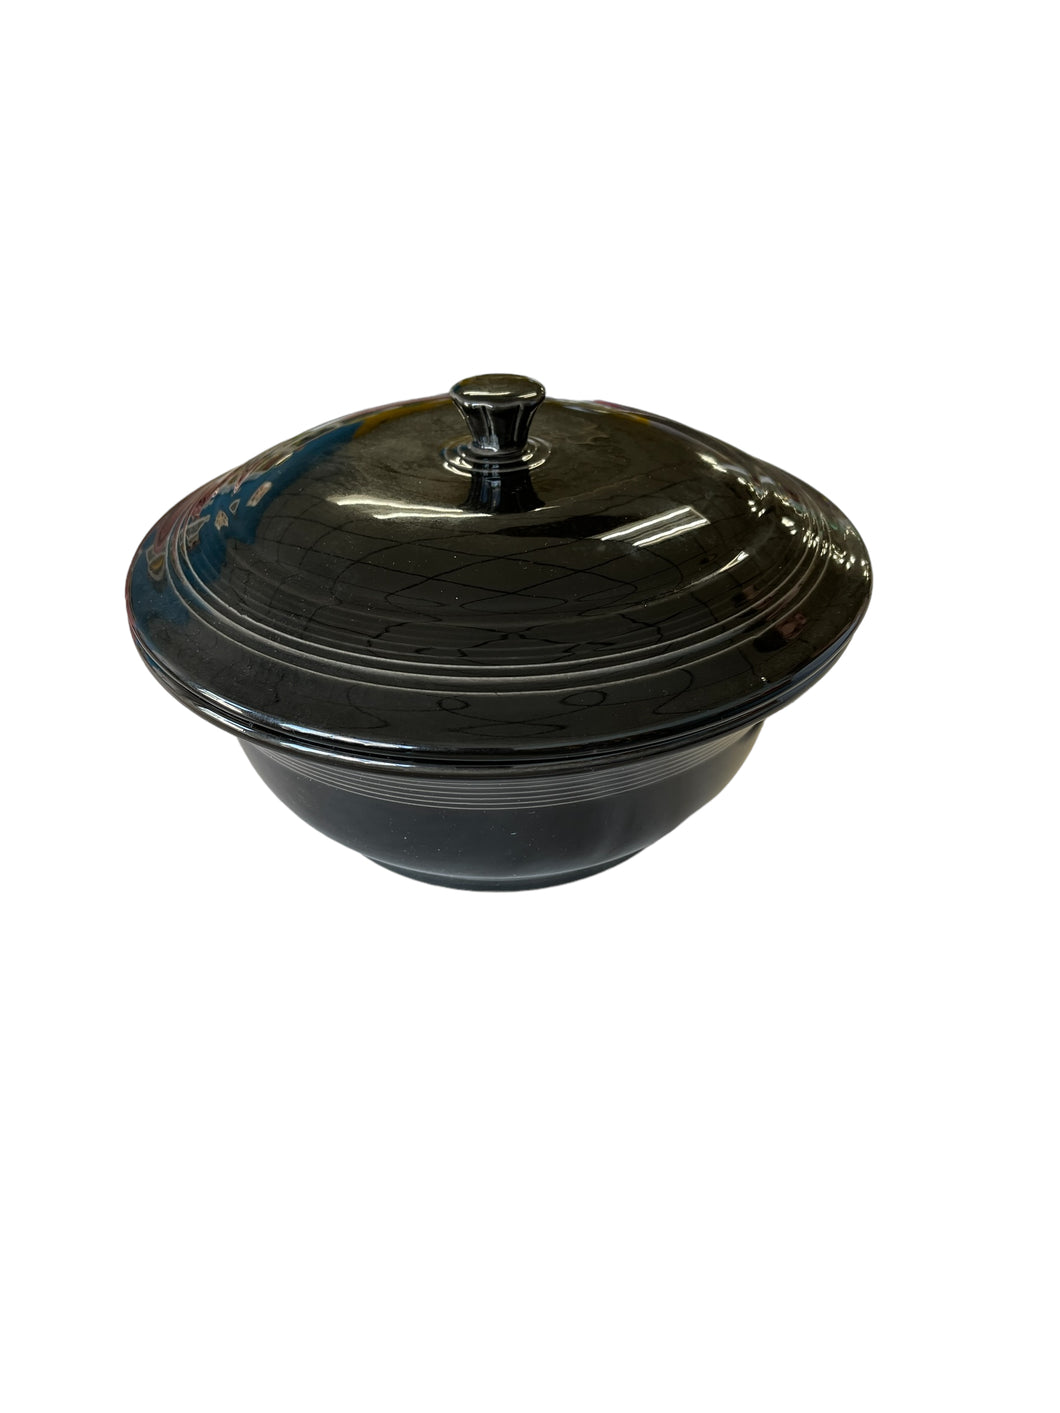 Fiesta  Black Covered Casserole Dish With Lid Retired